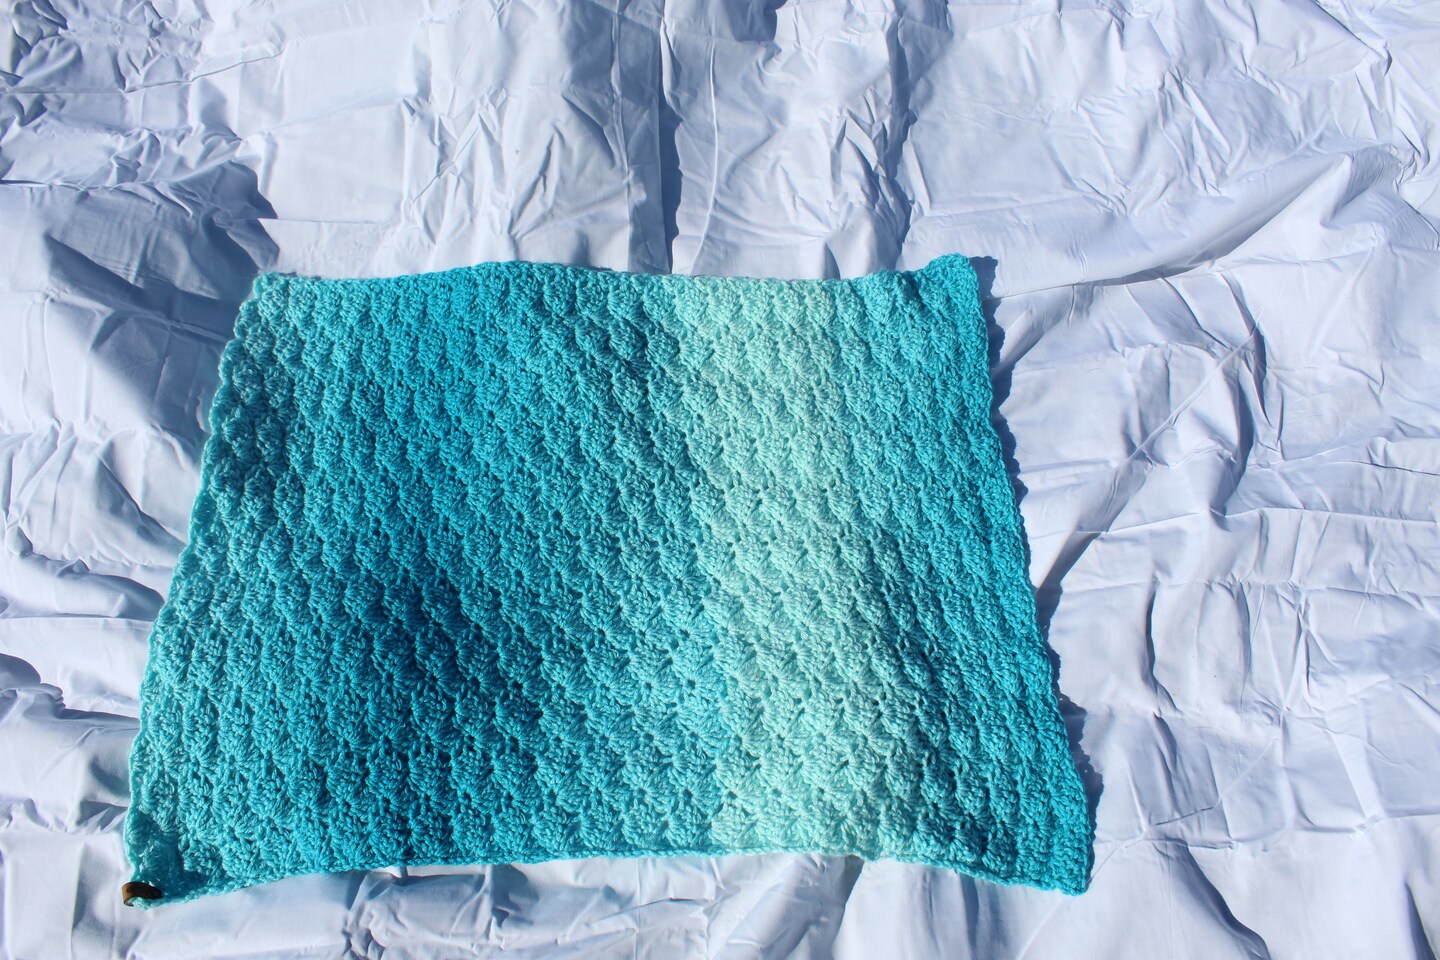 Blue Ombre Crochet Blanket (Free Pattern) - Crafting Each Day